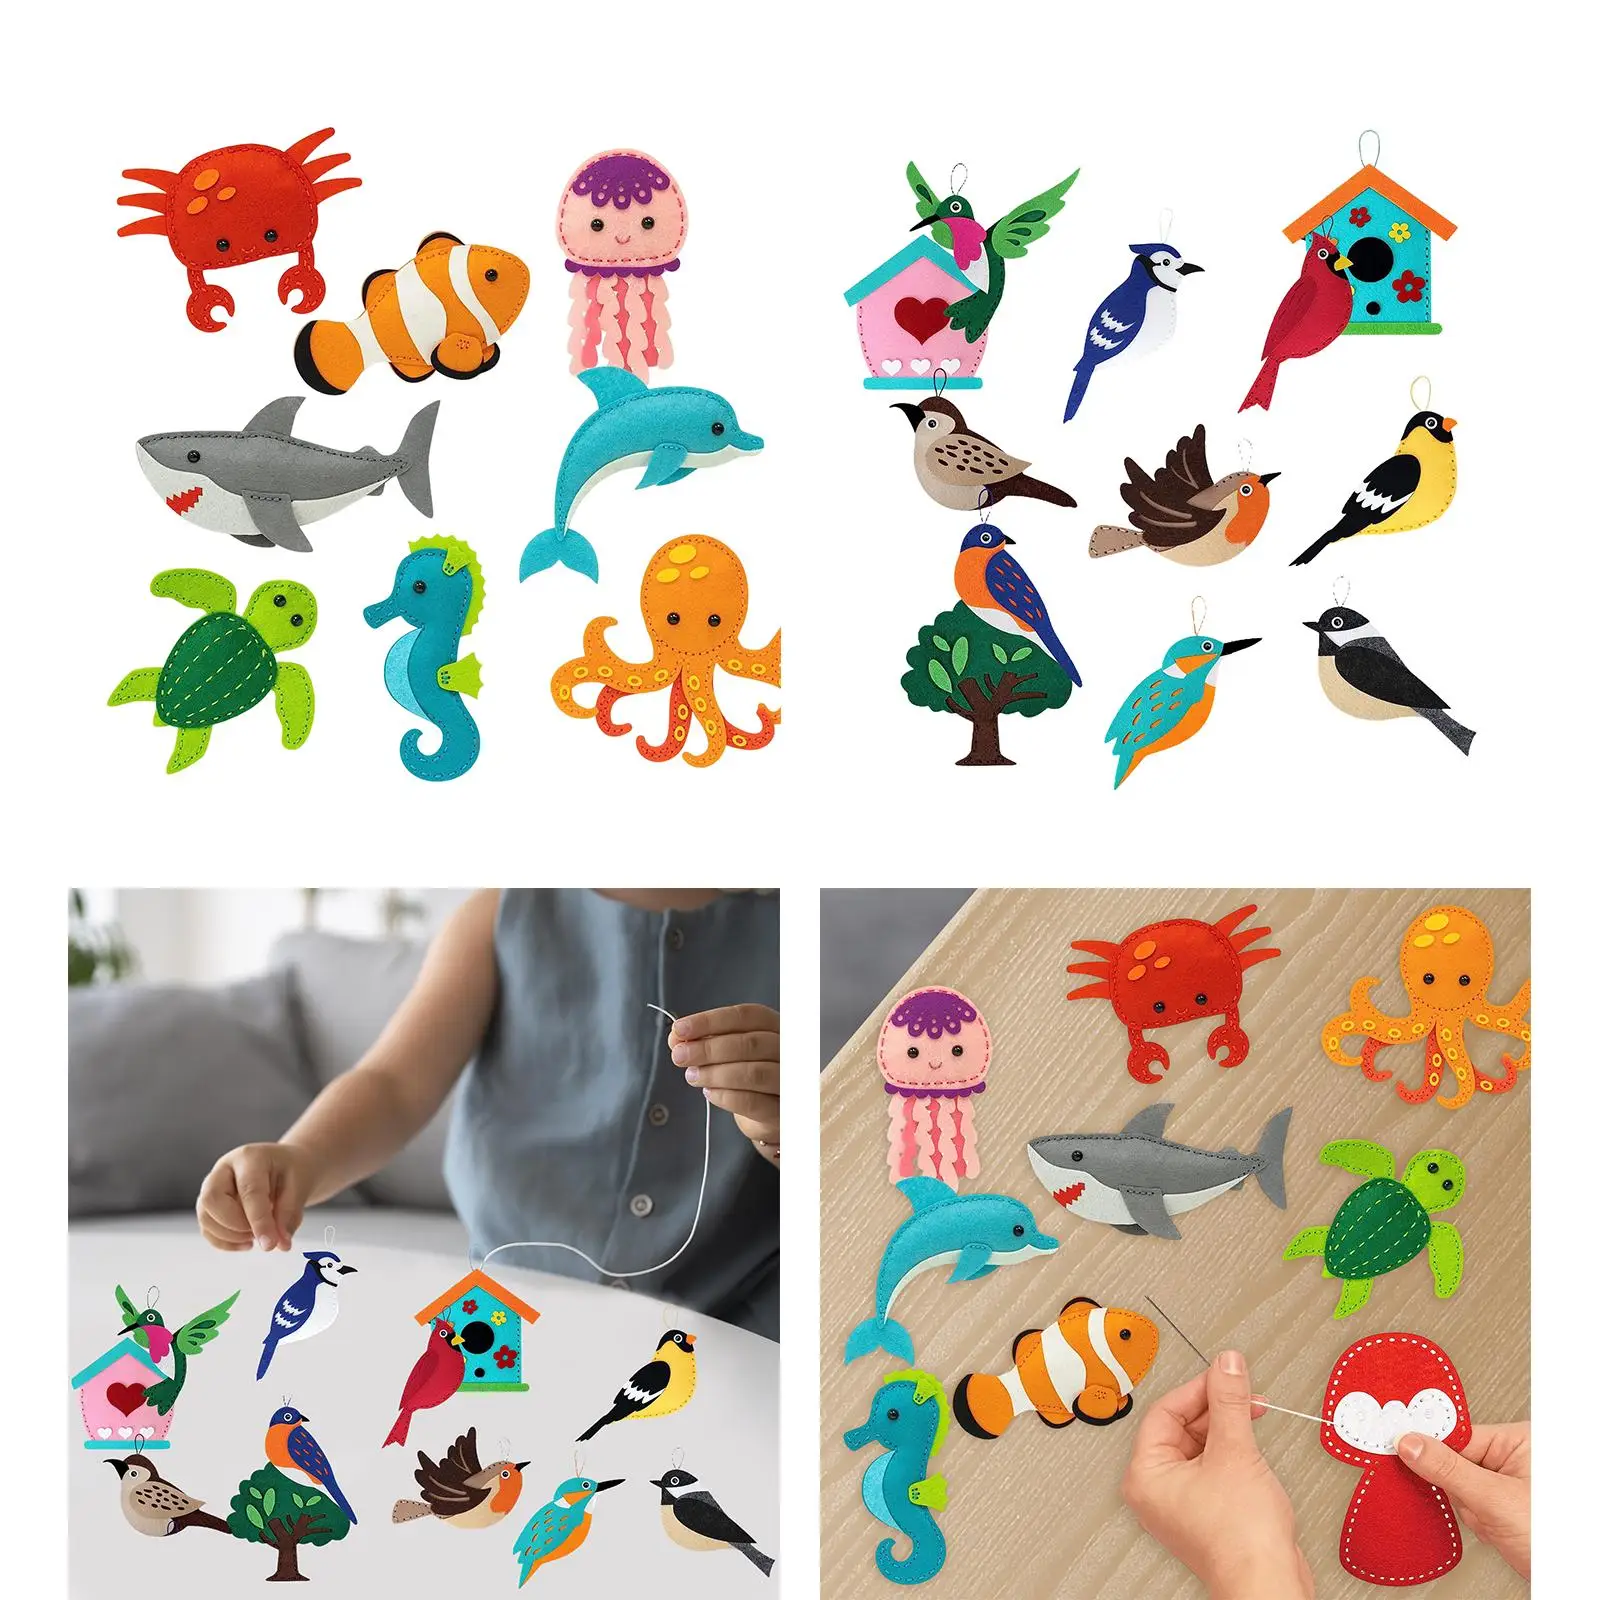 Kid Sewing craft and Birds Cute Animals Art Craft Kits for Beginners DIY Crafting and Sewing Set for Toddler Kids Teens